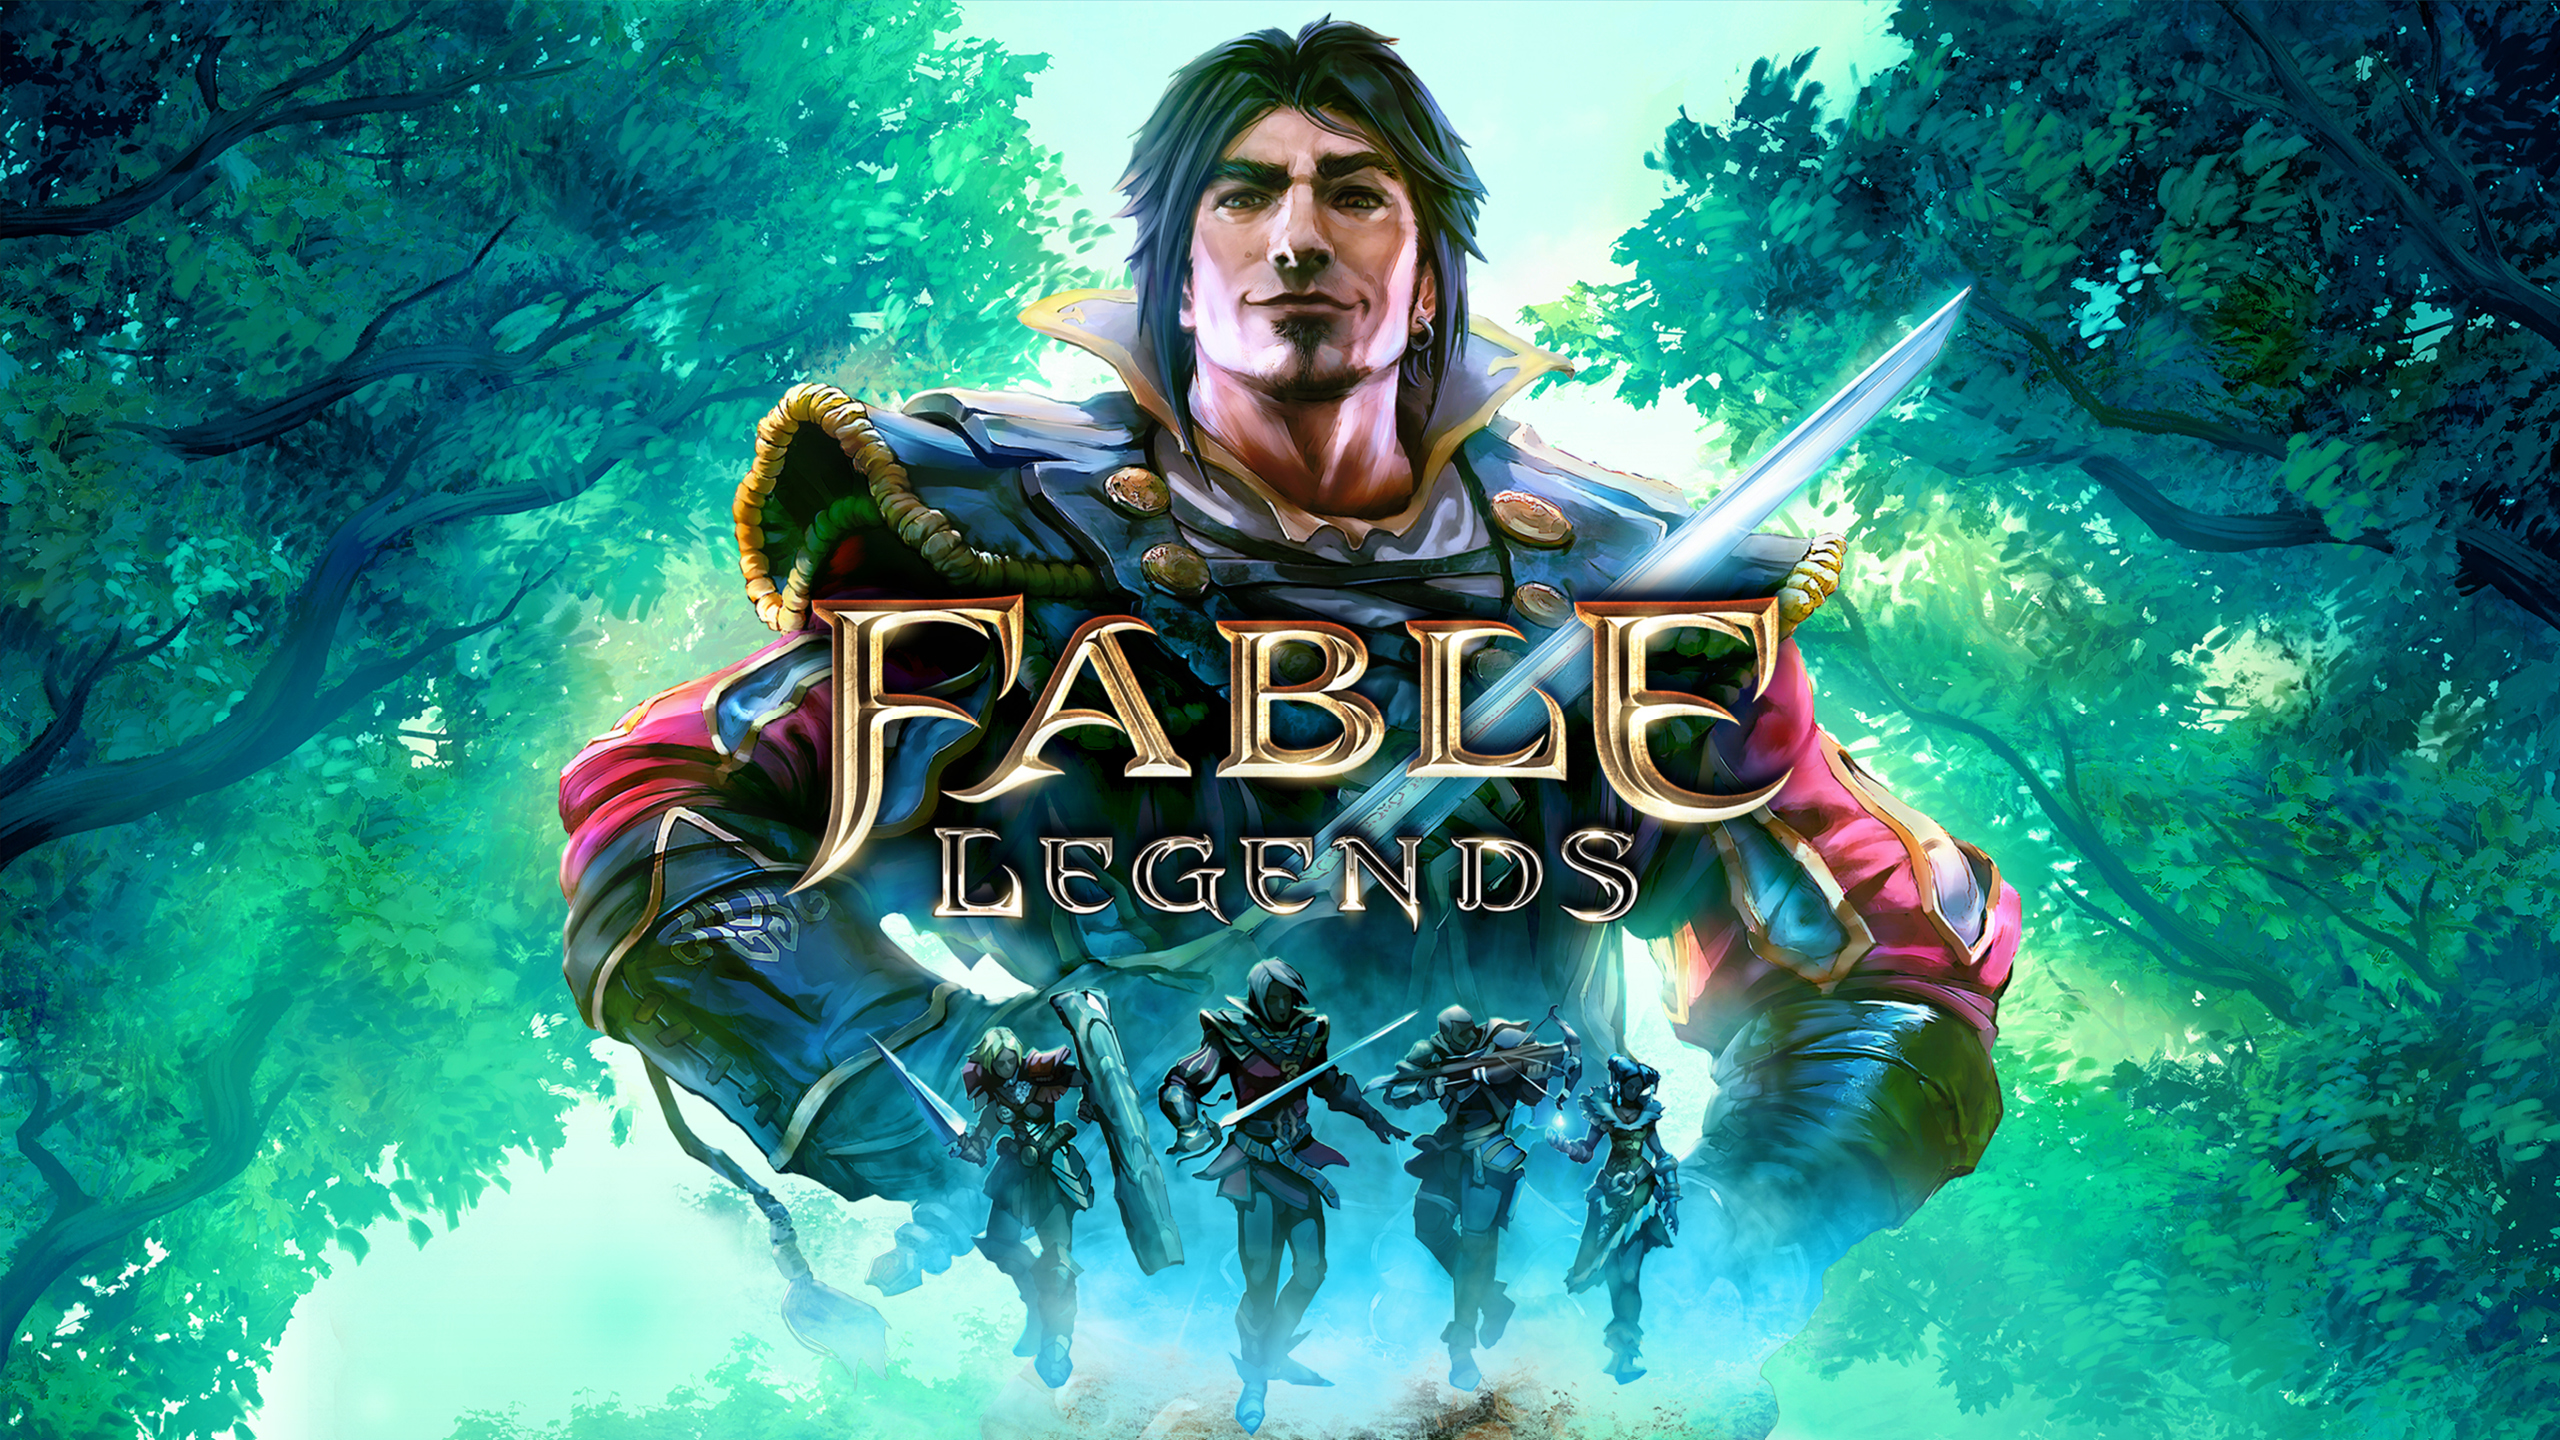 Fable Legends Wallpapers